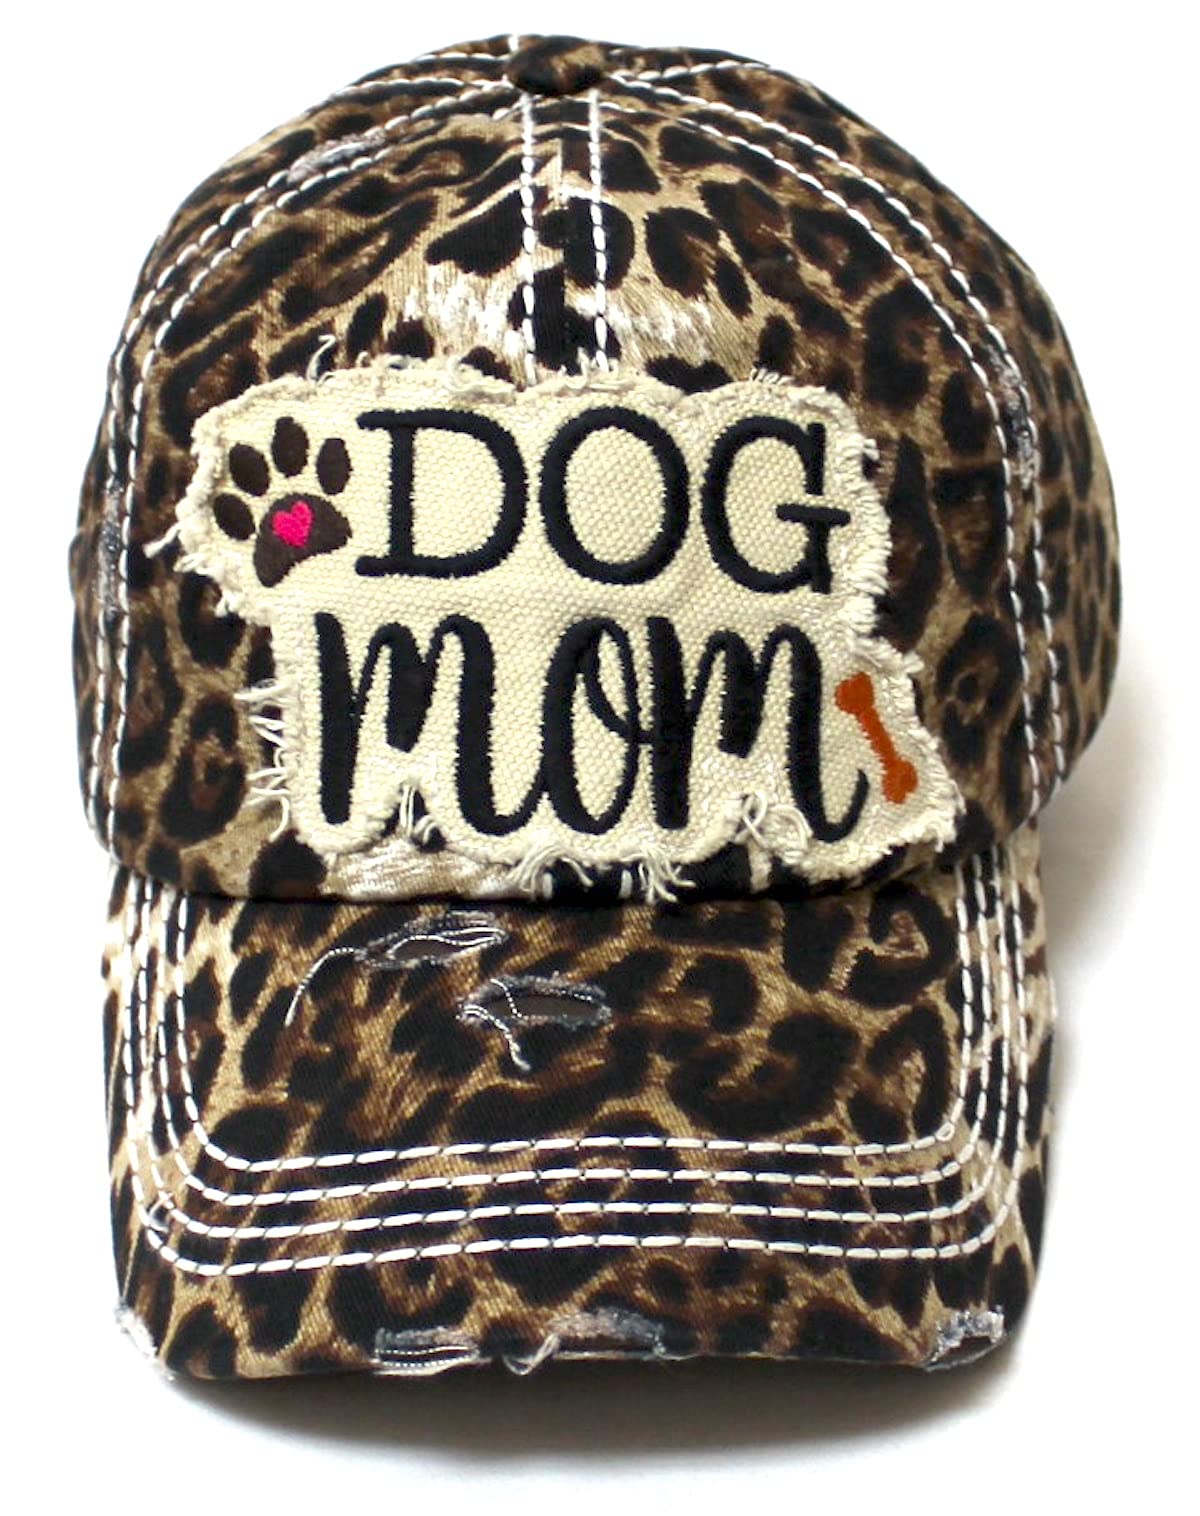 CAPS 'N VINTAGE Women's Ballcap Dog Mom Bone & Paw Patch Embroidery Hat